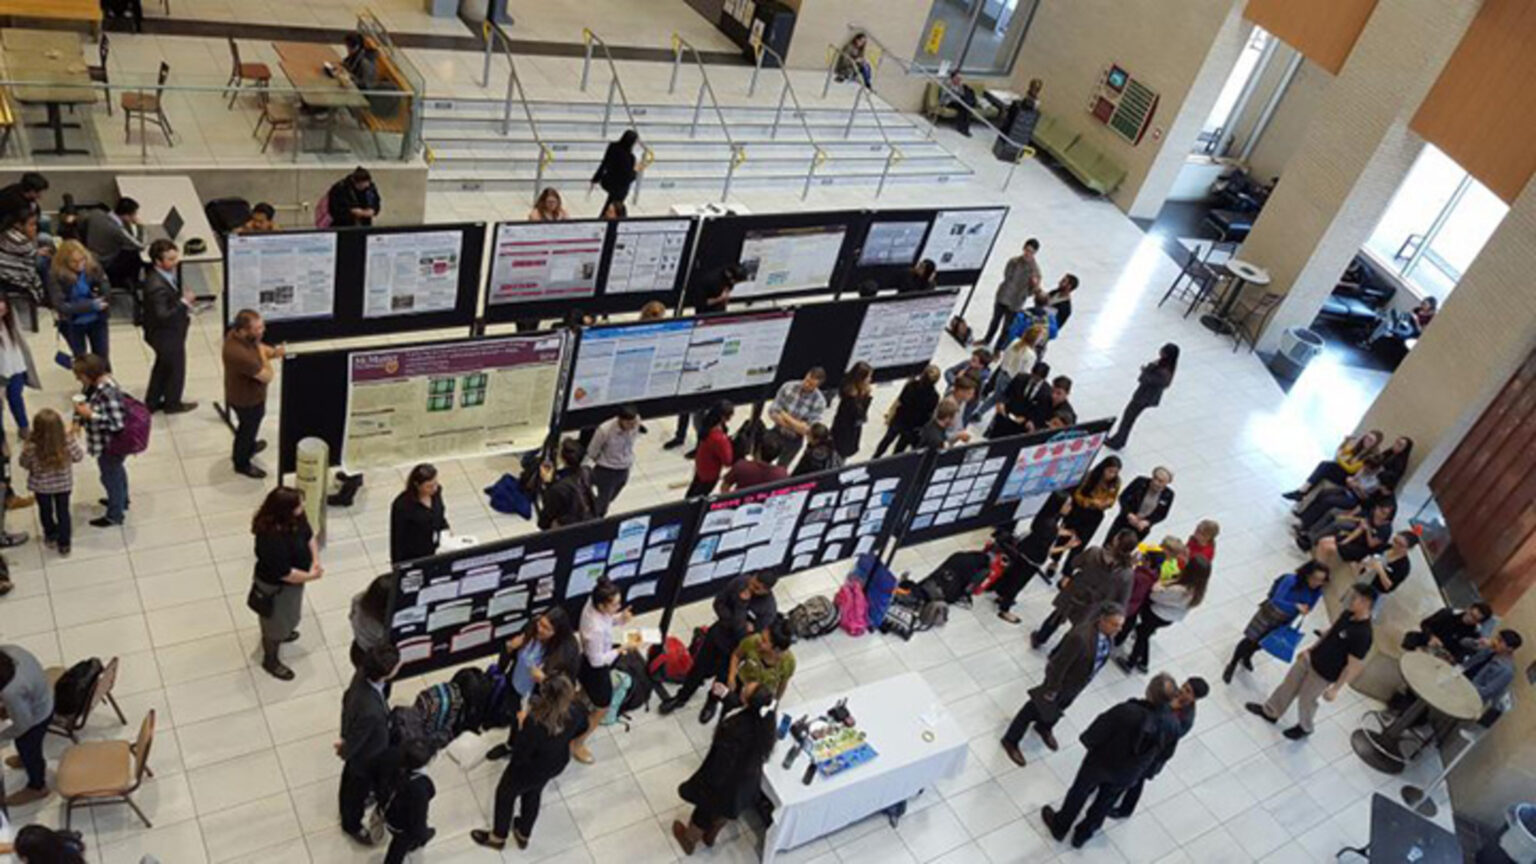 Water Research posters at MUSC